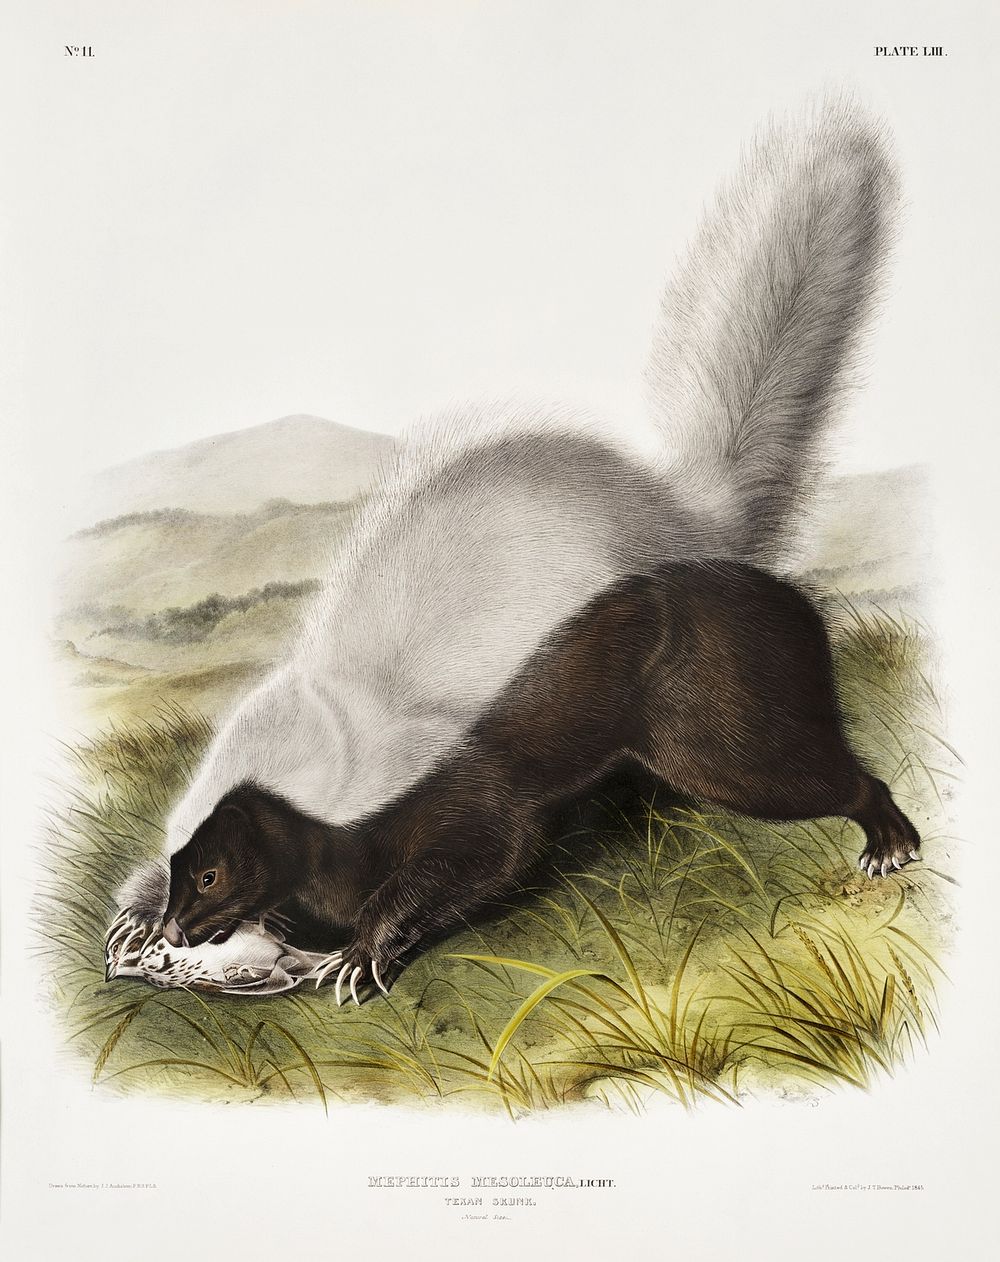 Texan Skunk (Mephitis mesoleuca) from the viviparous quadrupeds of North America (1845) illustrated by John Woodhouse…